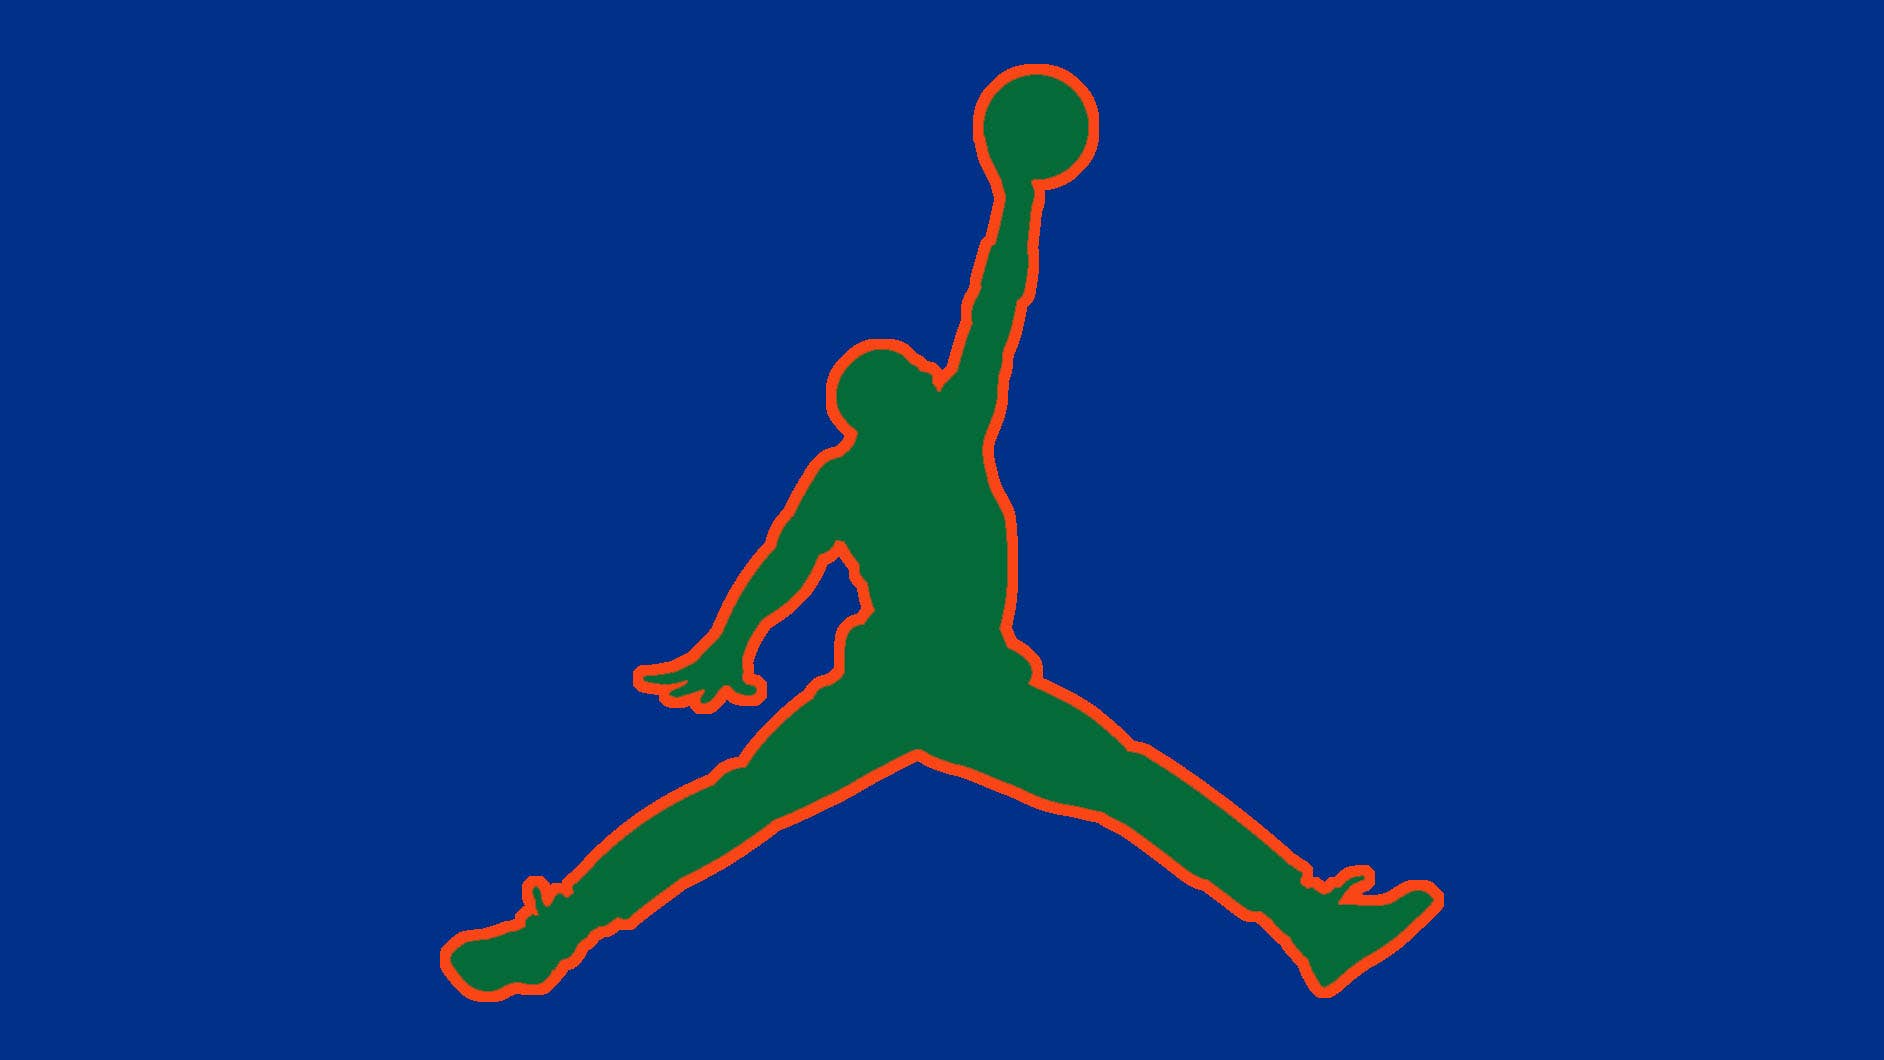 Florida Gators Are the Latest School to Partner With Jordan Brand | Complex